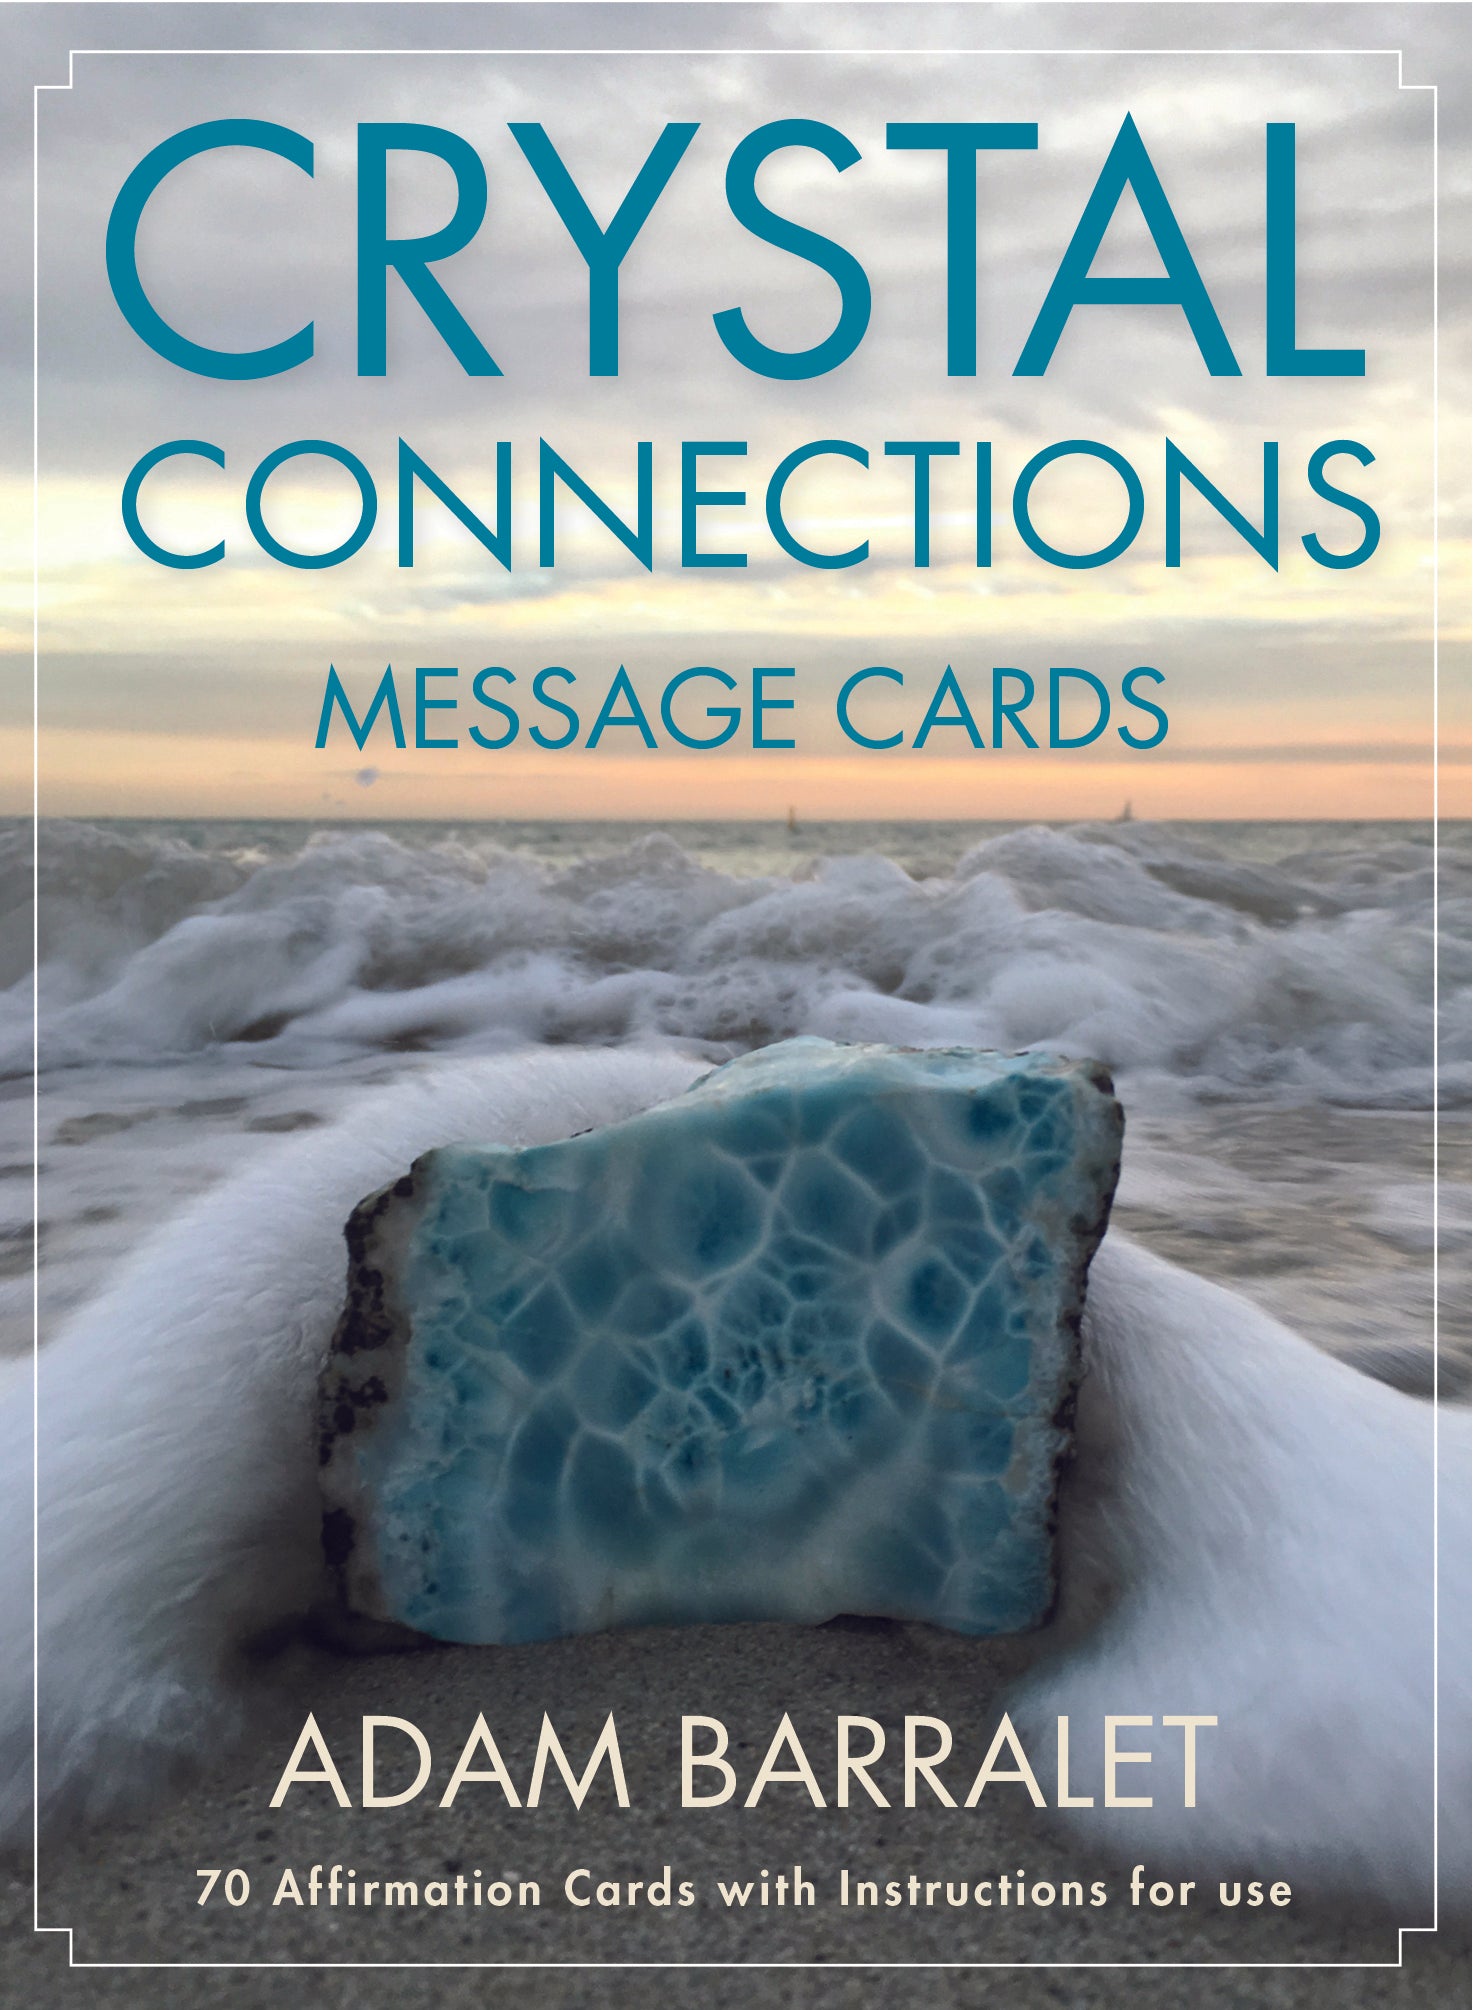 Crystal Connections Message Cards - Lighten Up Shop